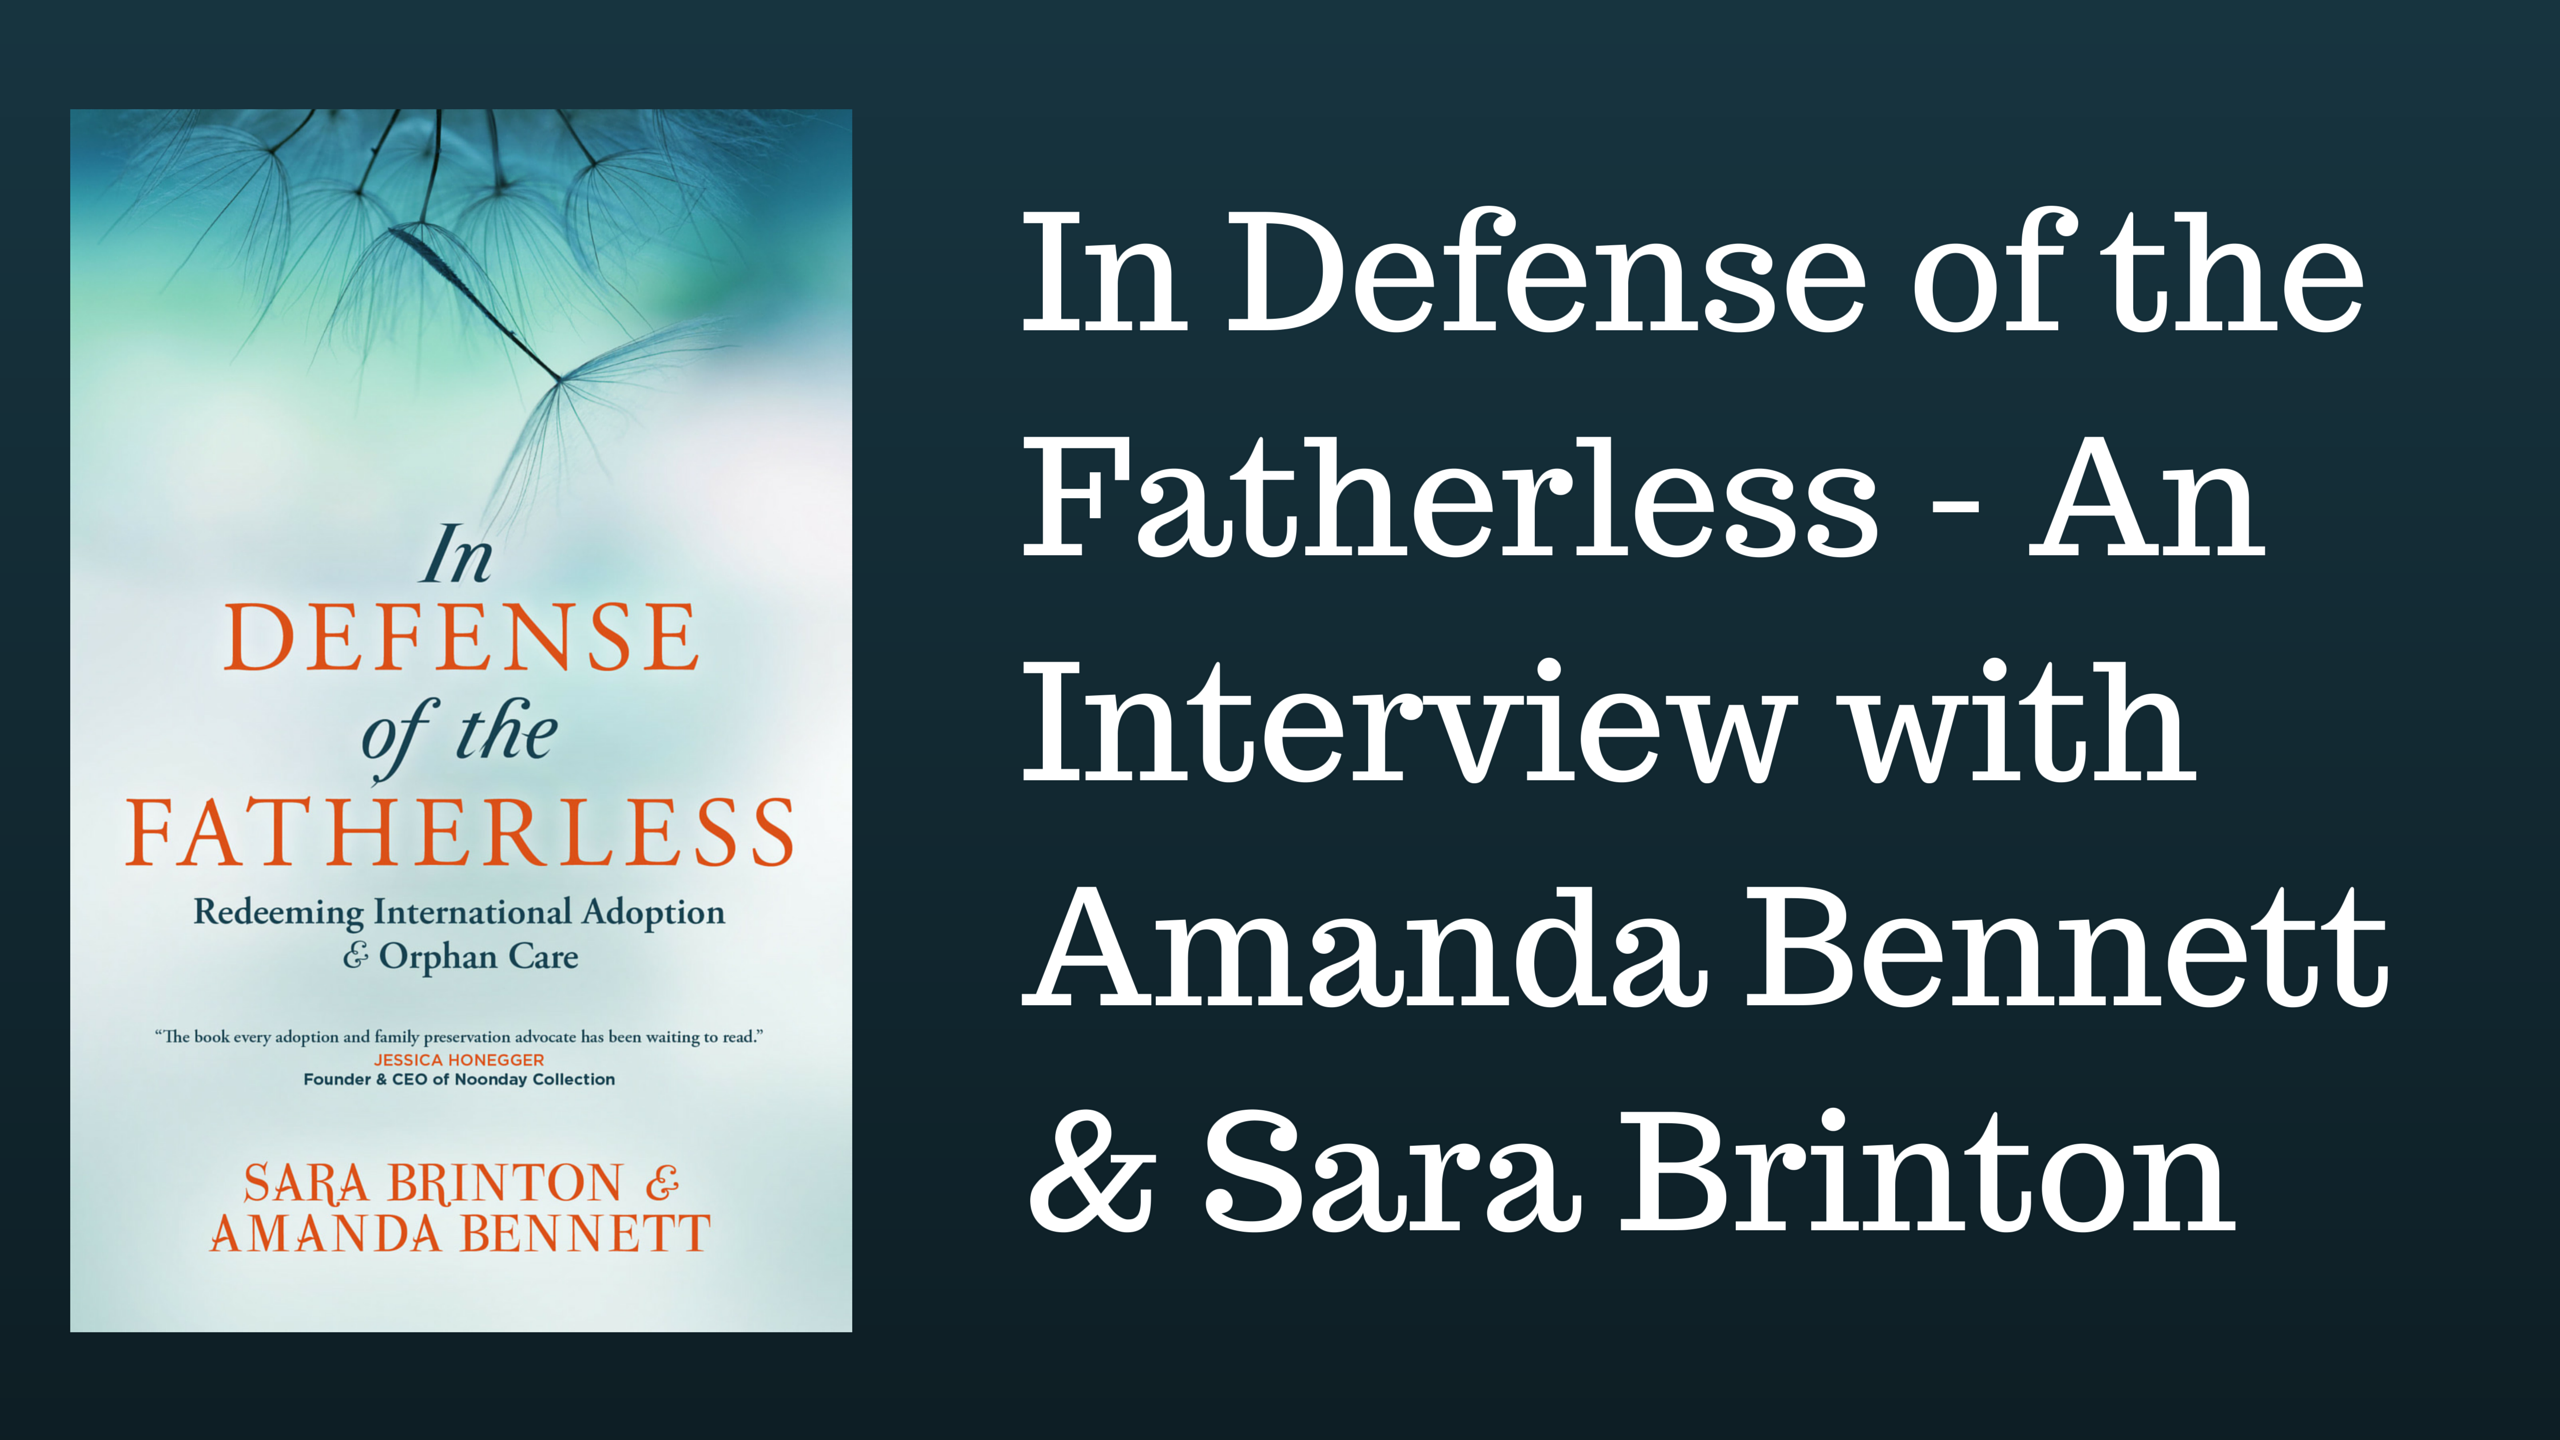 In Defense of the Fatherless